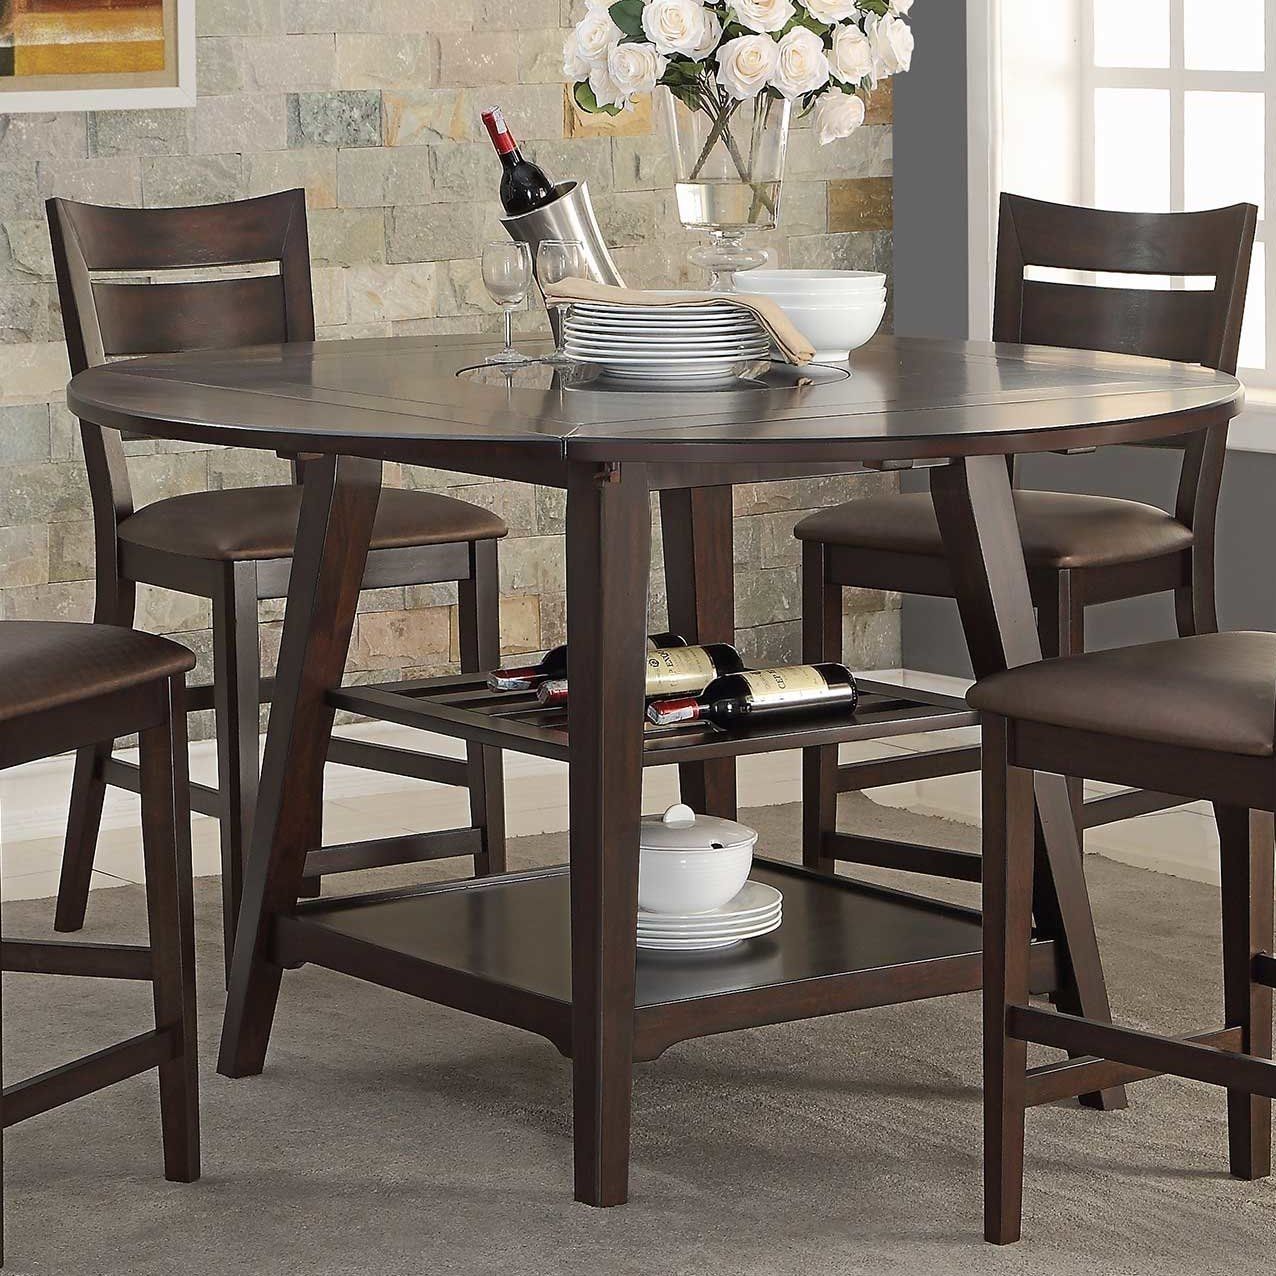 Caden 60" Round Extendable Dining Table | Products | Pinterest With Most Current Caden Round Dining Tables (View 7 of 20)